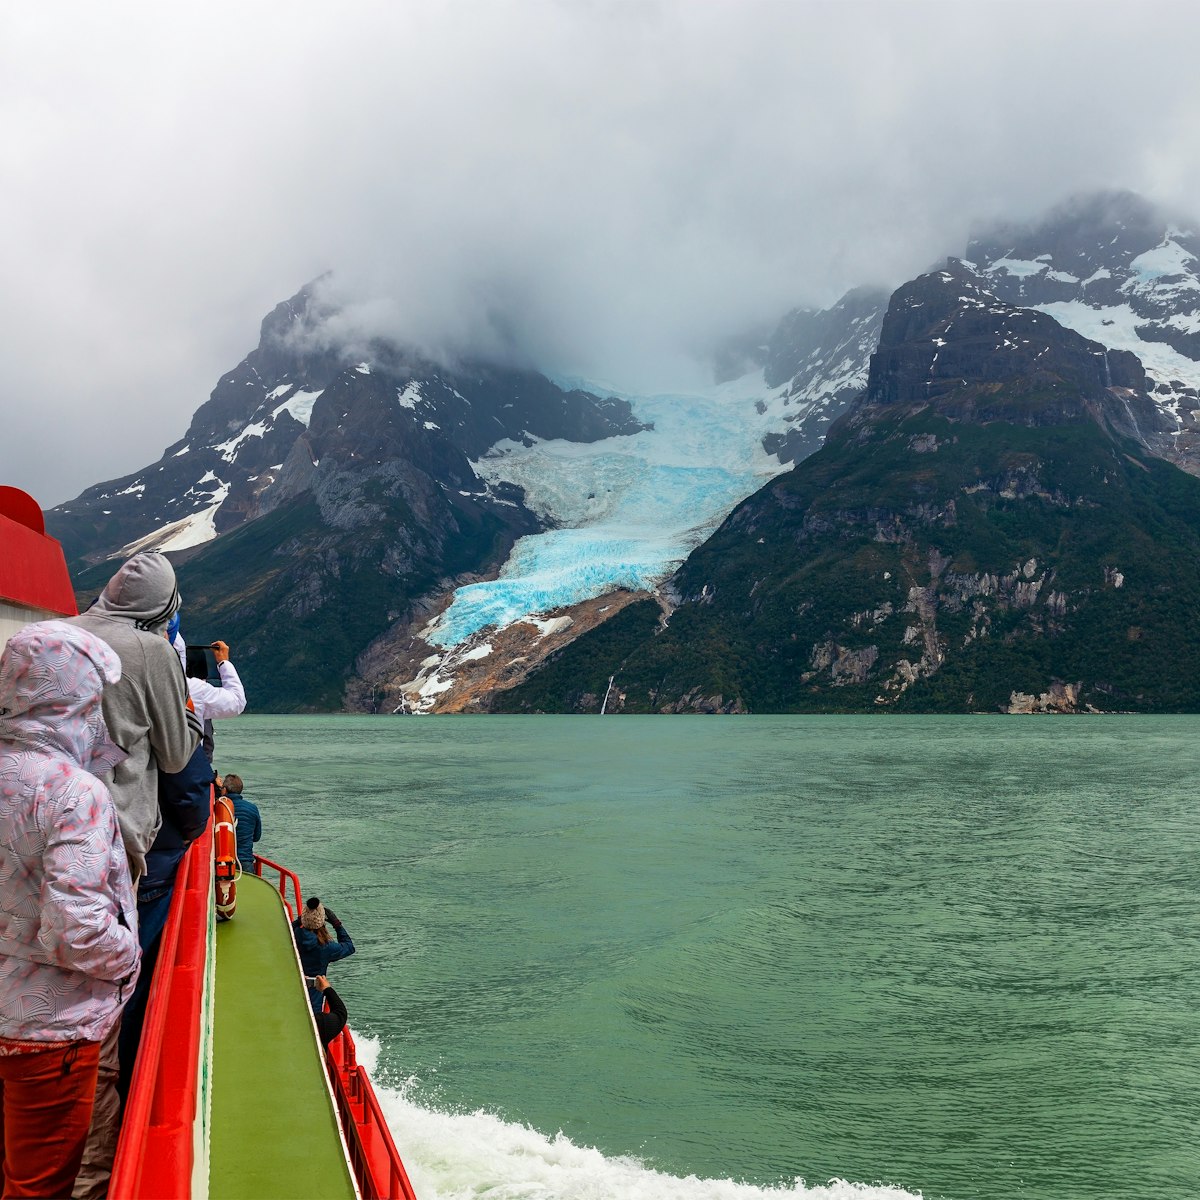 Tourists on a exploration cruise approaching the Balmaceda glacier on the Last Hope Sound, Bernardo O Higgins National Park, Patagonia, Chile.